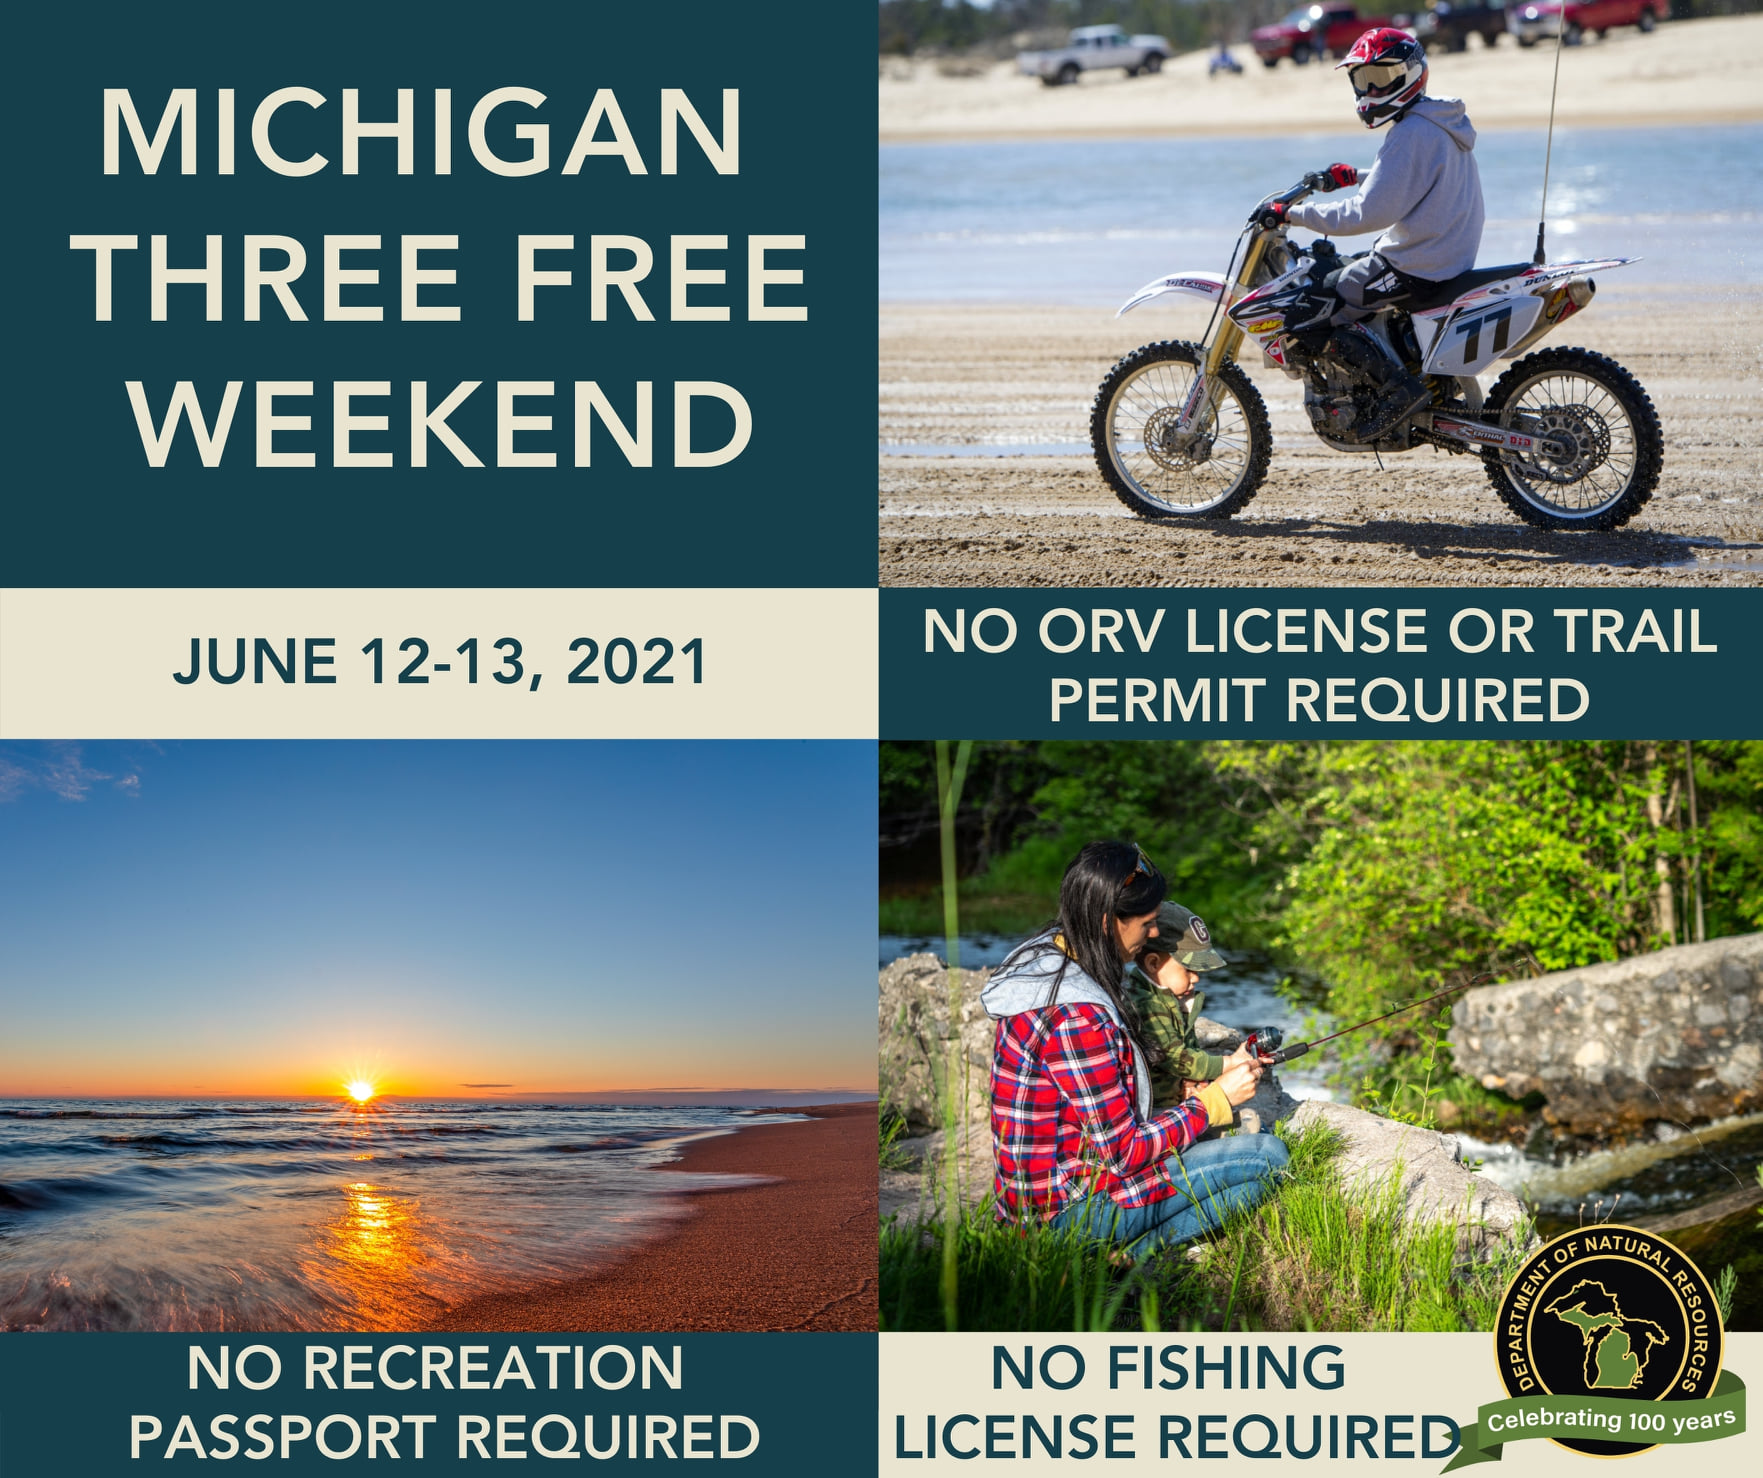 Free fishing, offroading and state park entry enjoy